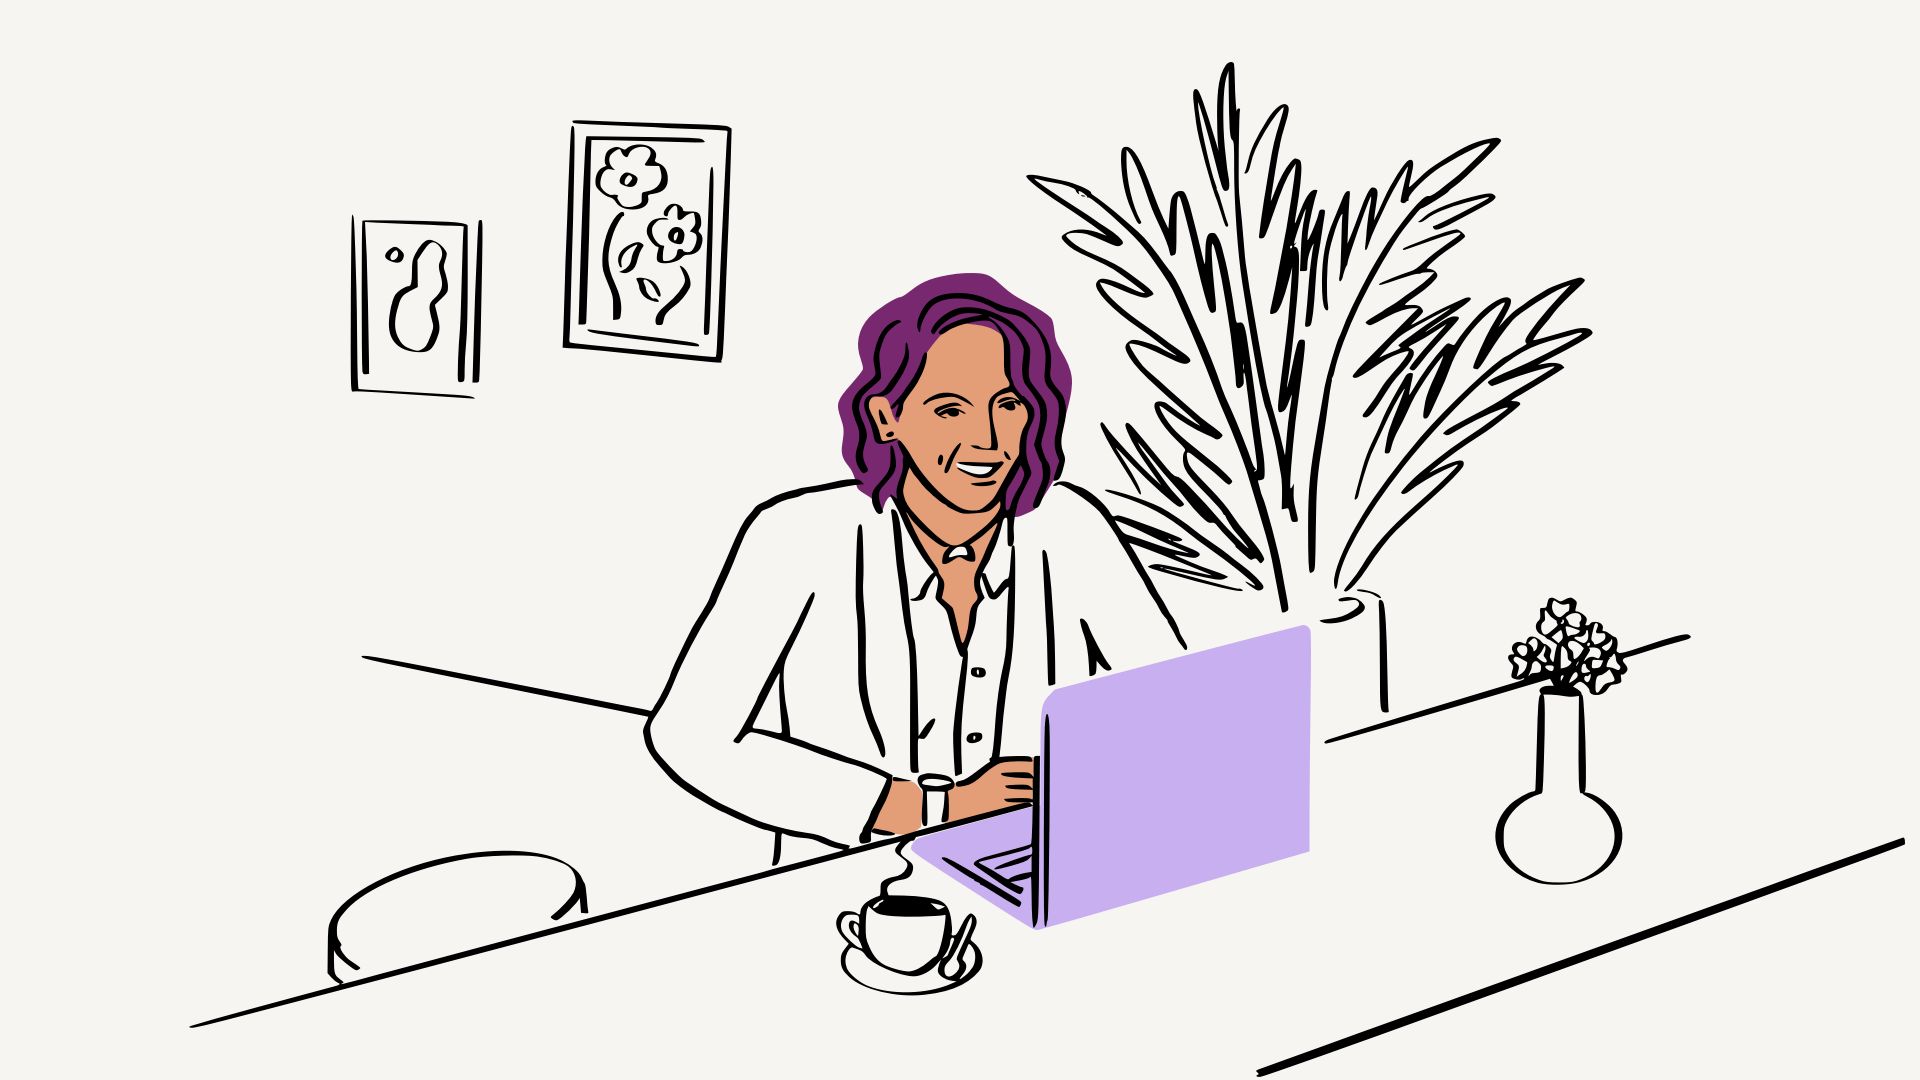 An illustration of a woman sitting in front of a purple laptop